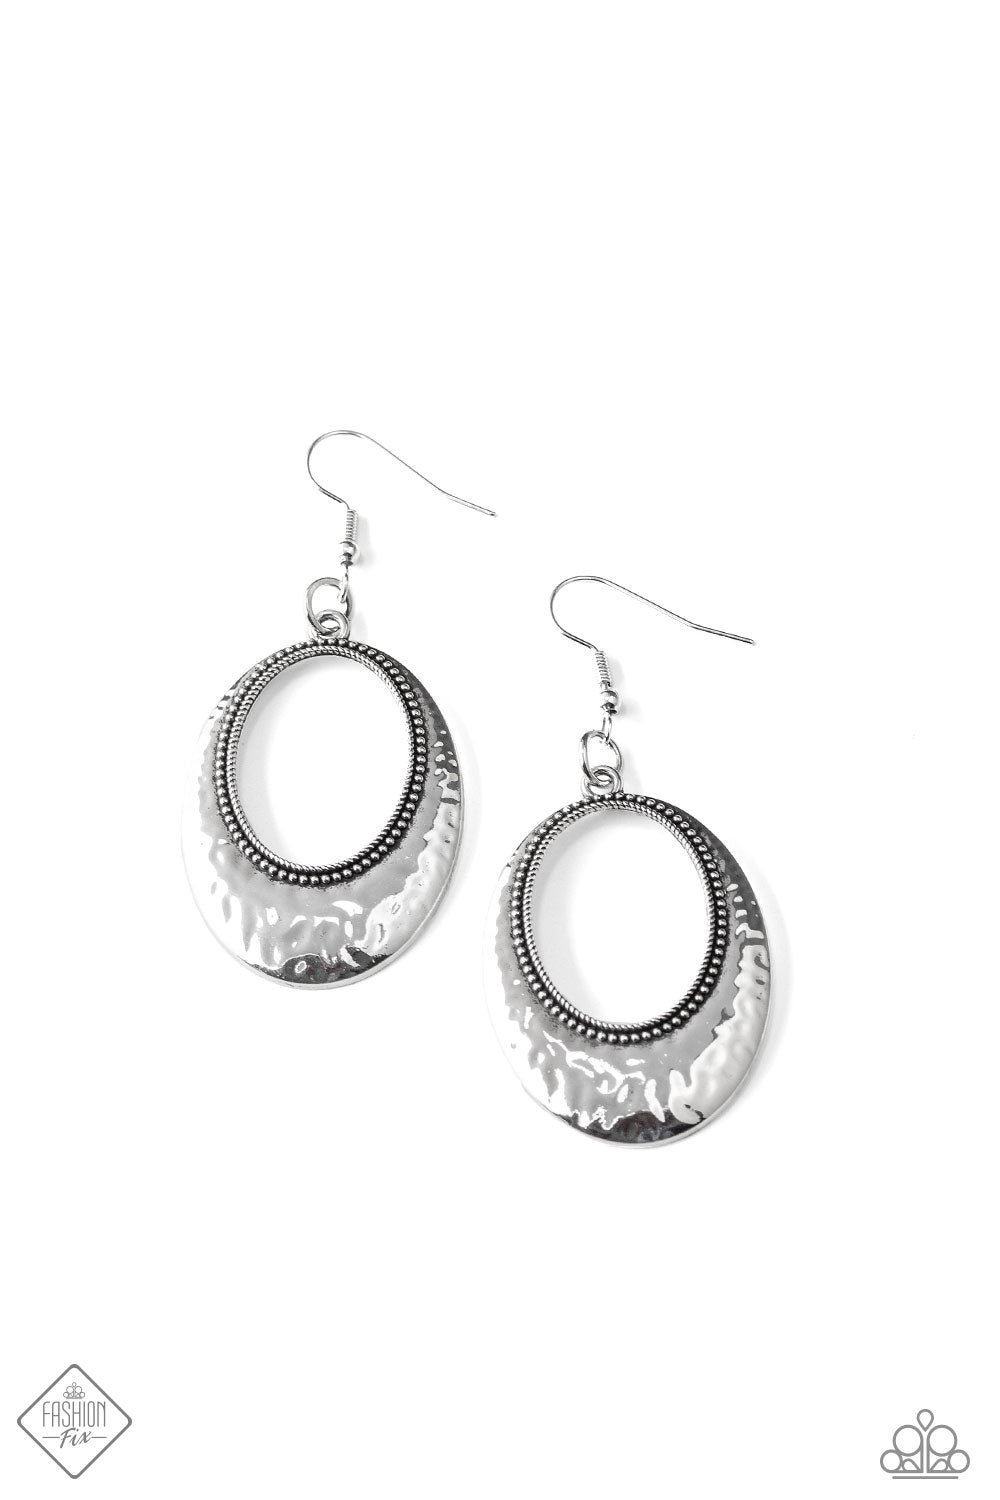 Paparazzi Earring - Tempest Texture - Silver